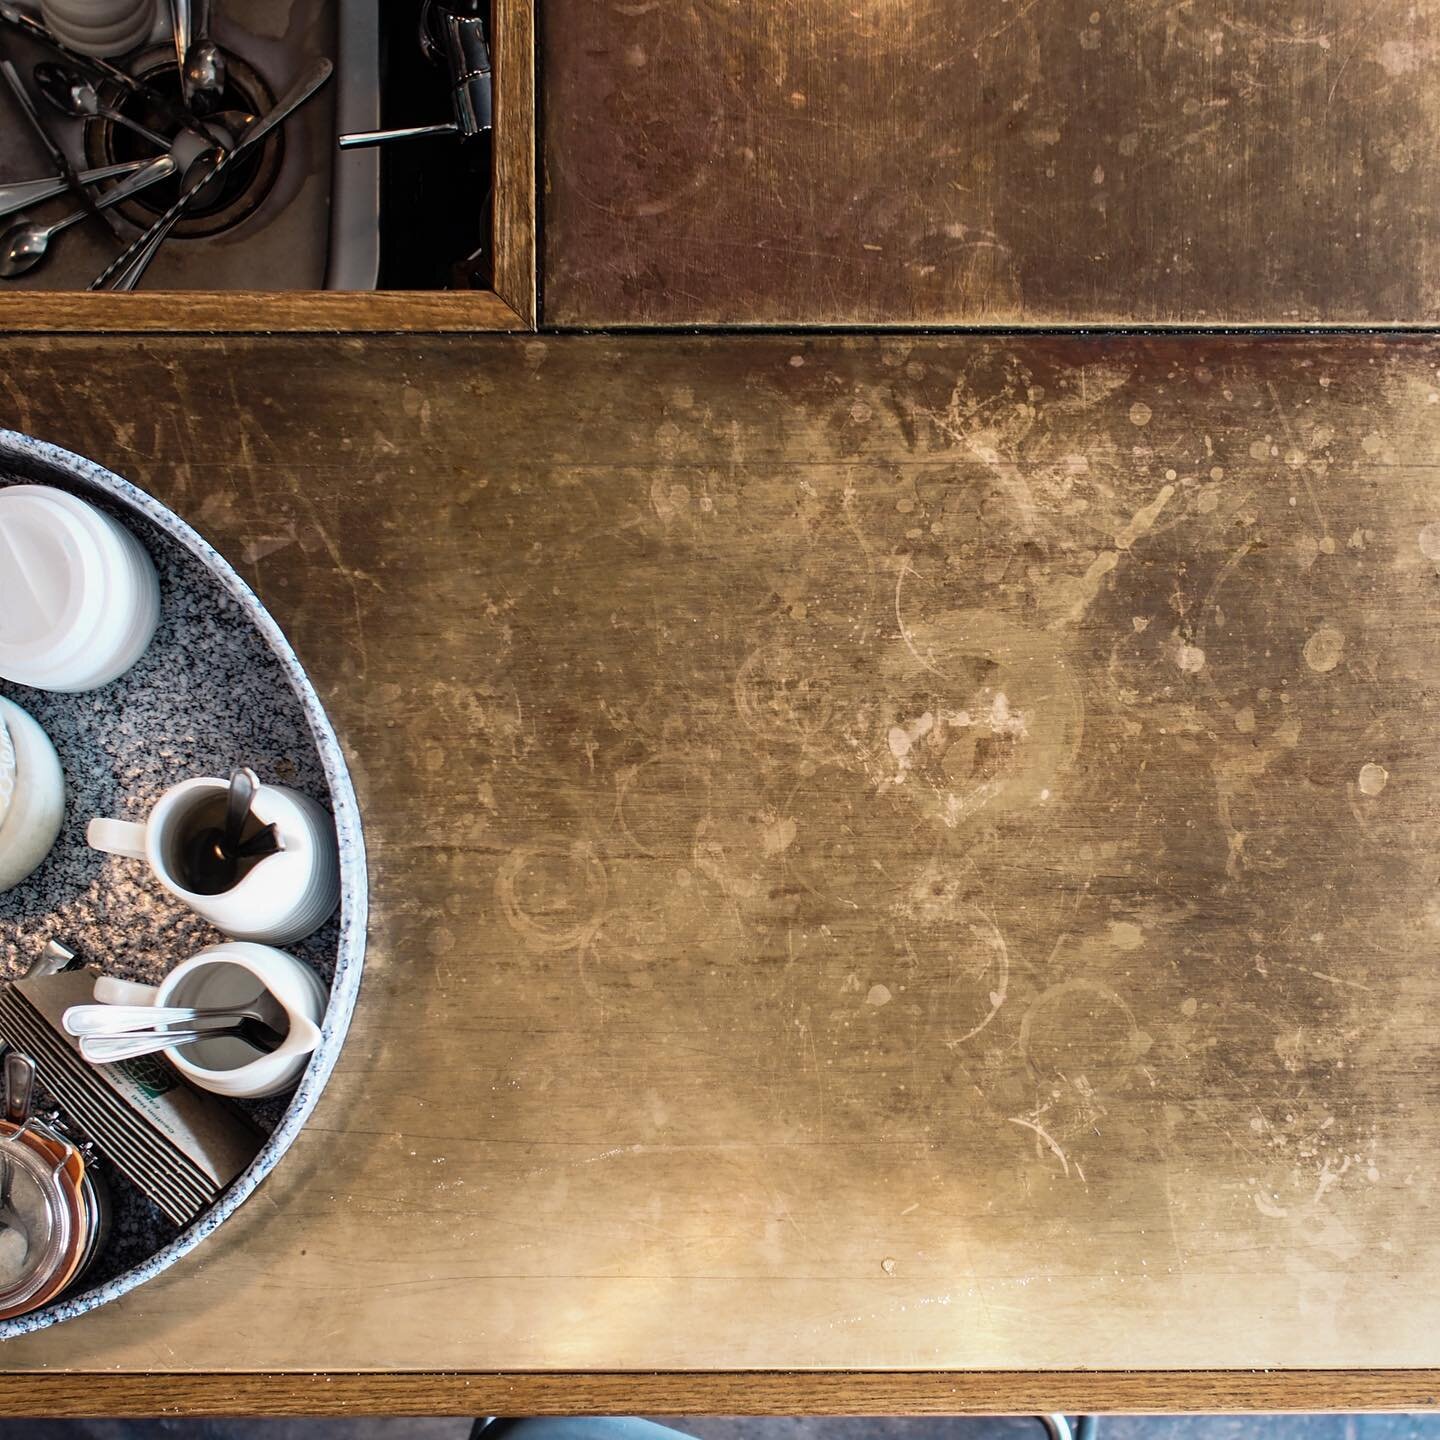 Patina patina patina!  This old pic got us thinking about the restaurants that are adapting under current COVID lockdown restrictions. Support your fav restaurants! 

This counter was custom made from near 100 year old recycled copper taken from a do